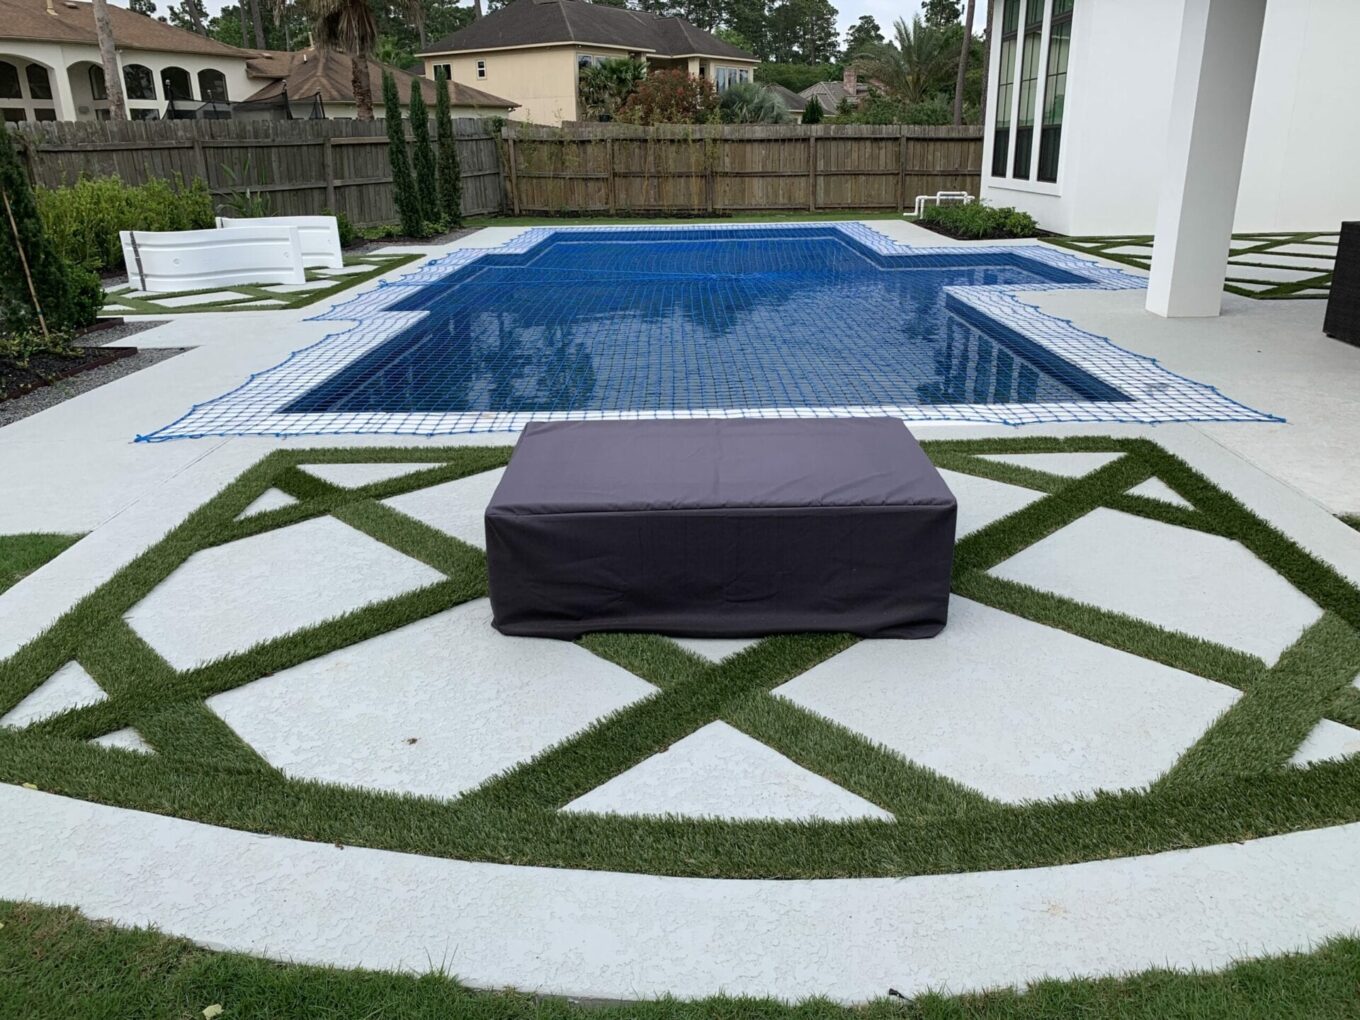 A pool with grass around it and a bench in the middle.